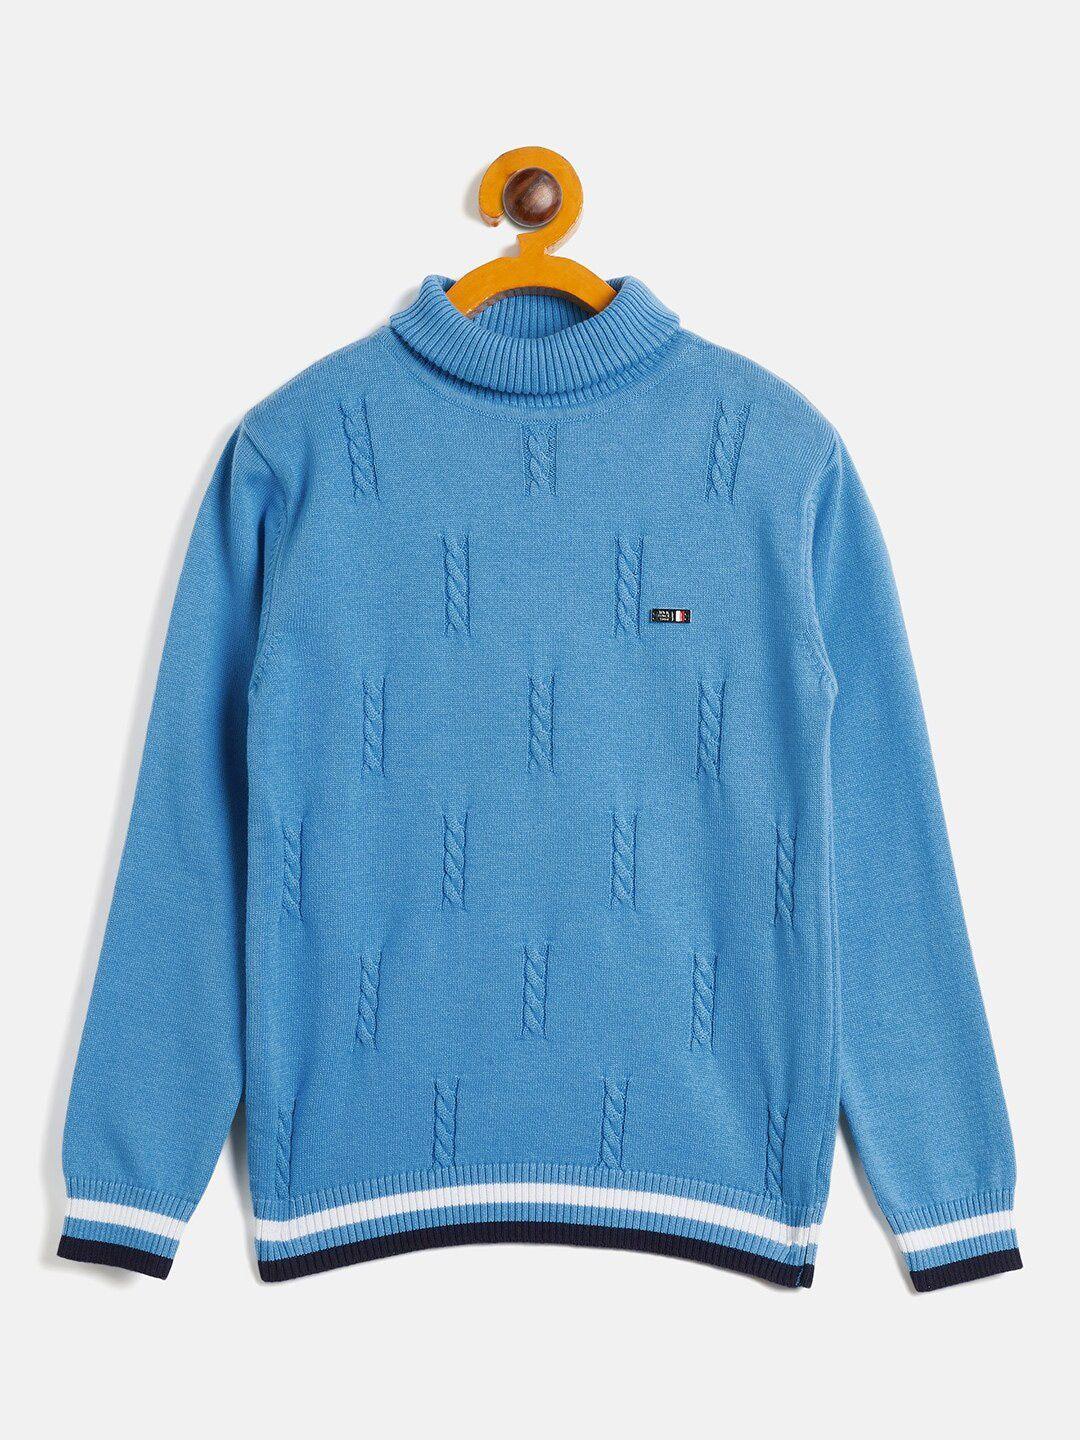 rvk boys cable knit self design high neck cotton pullover sweater